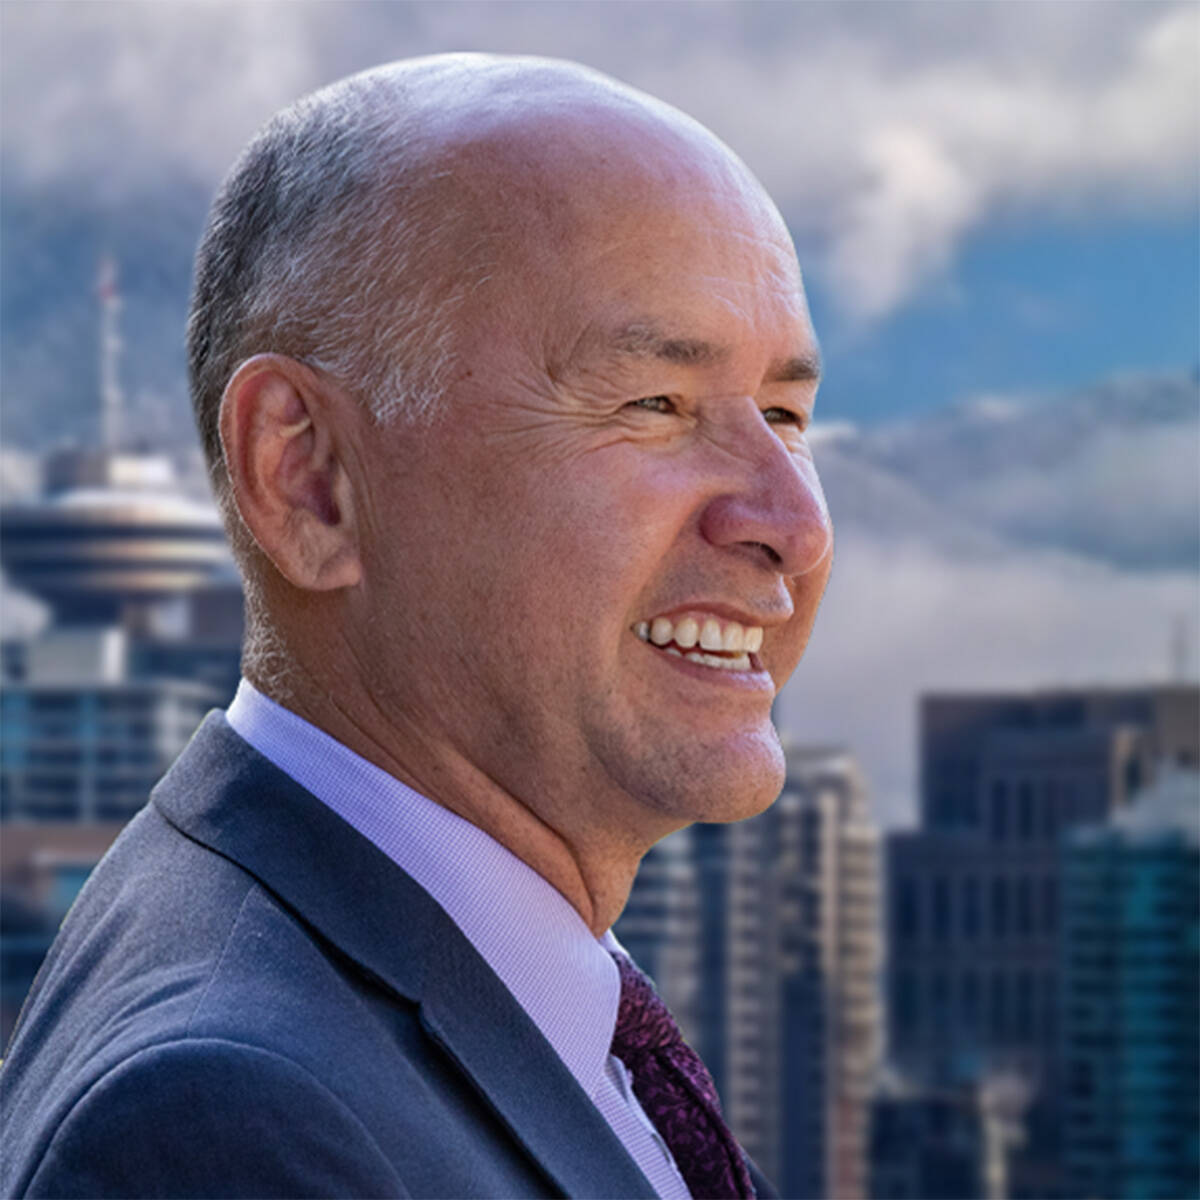 Ellis Ross leaves BC United to run federal Conservative . (Photo courtesy Ken Herar).